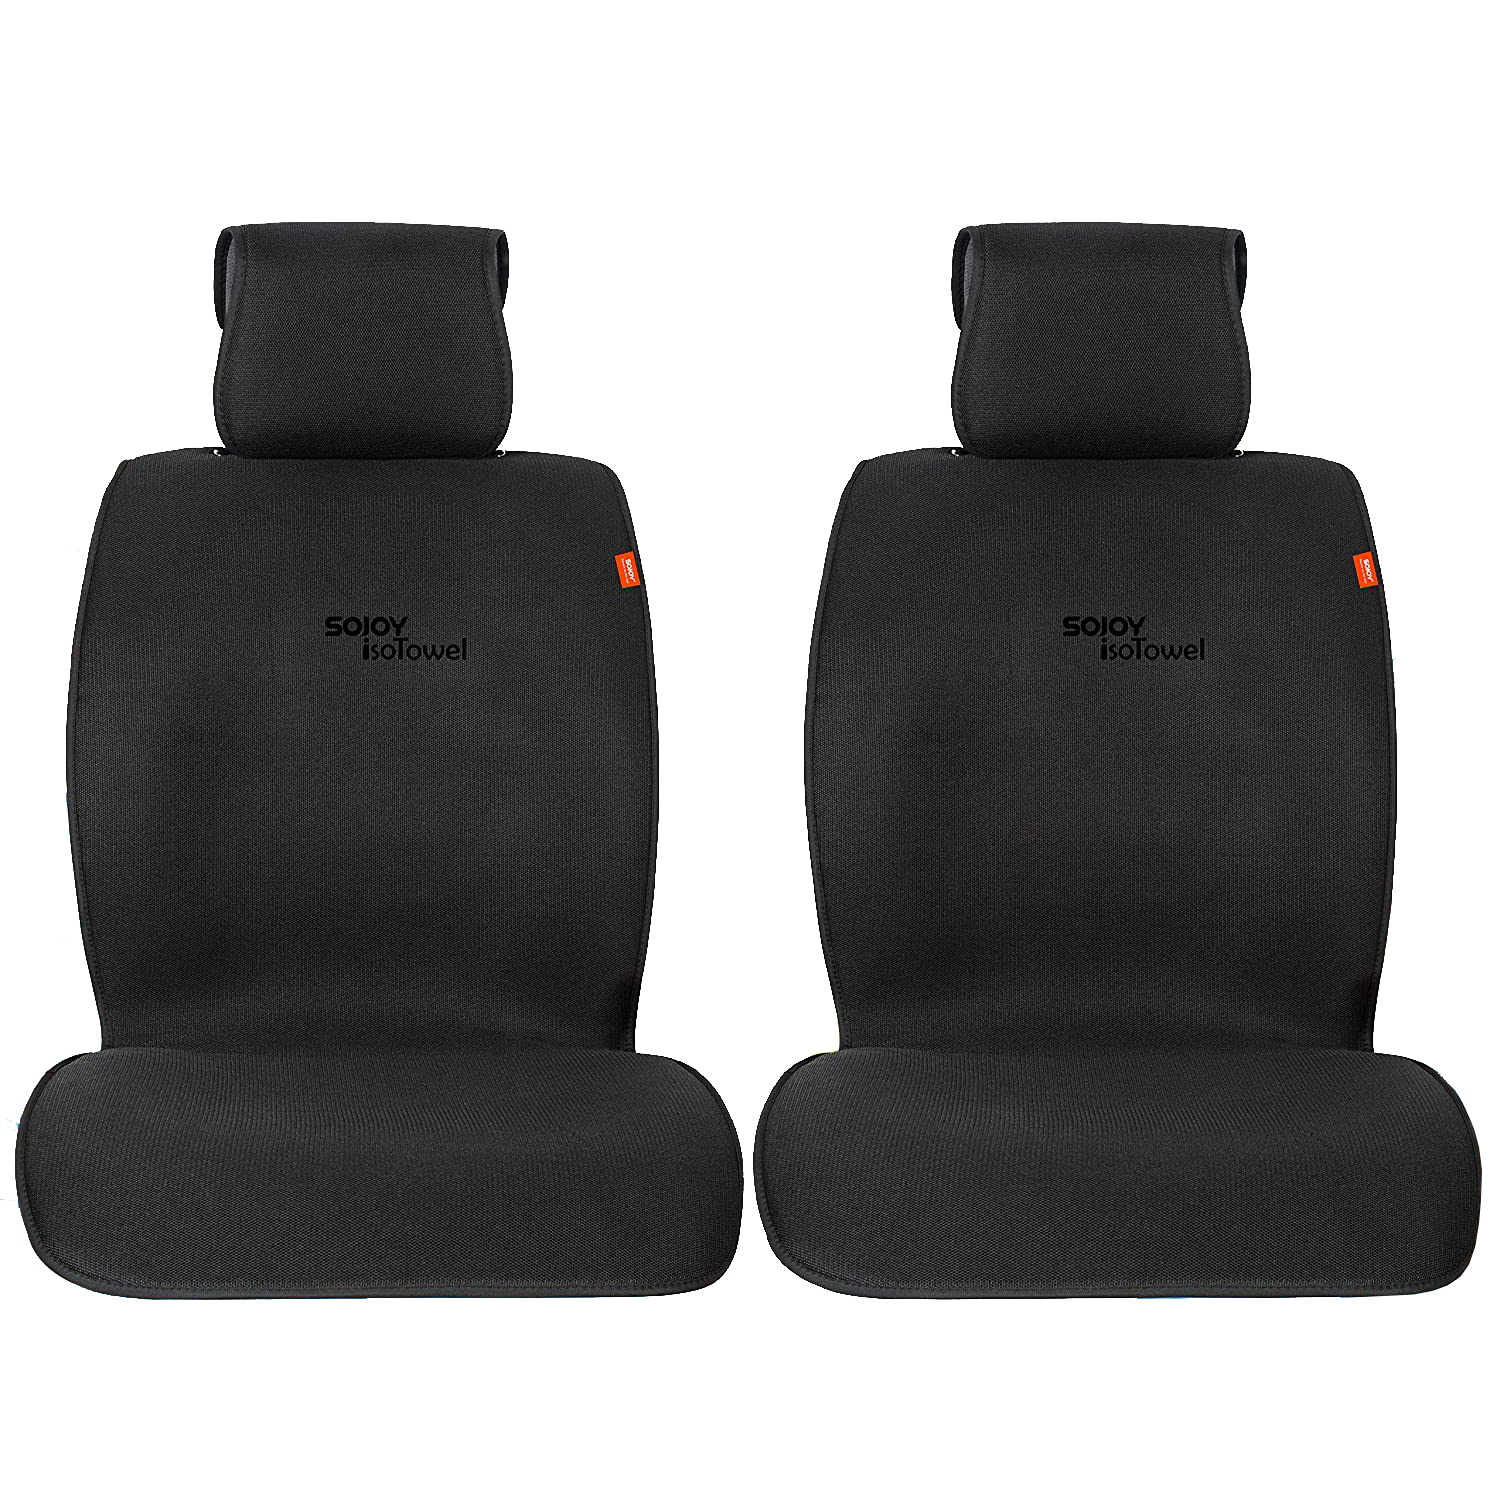 Washable Car Seat Covers Cushions IsoTowel Car Front Seat Cover